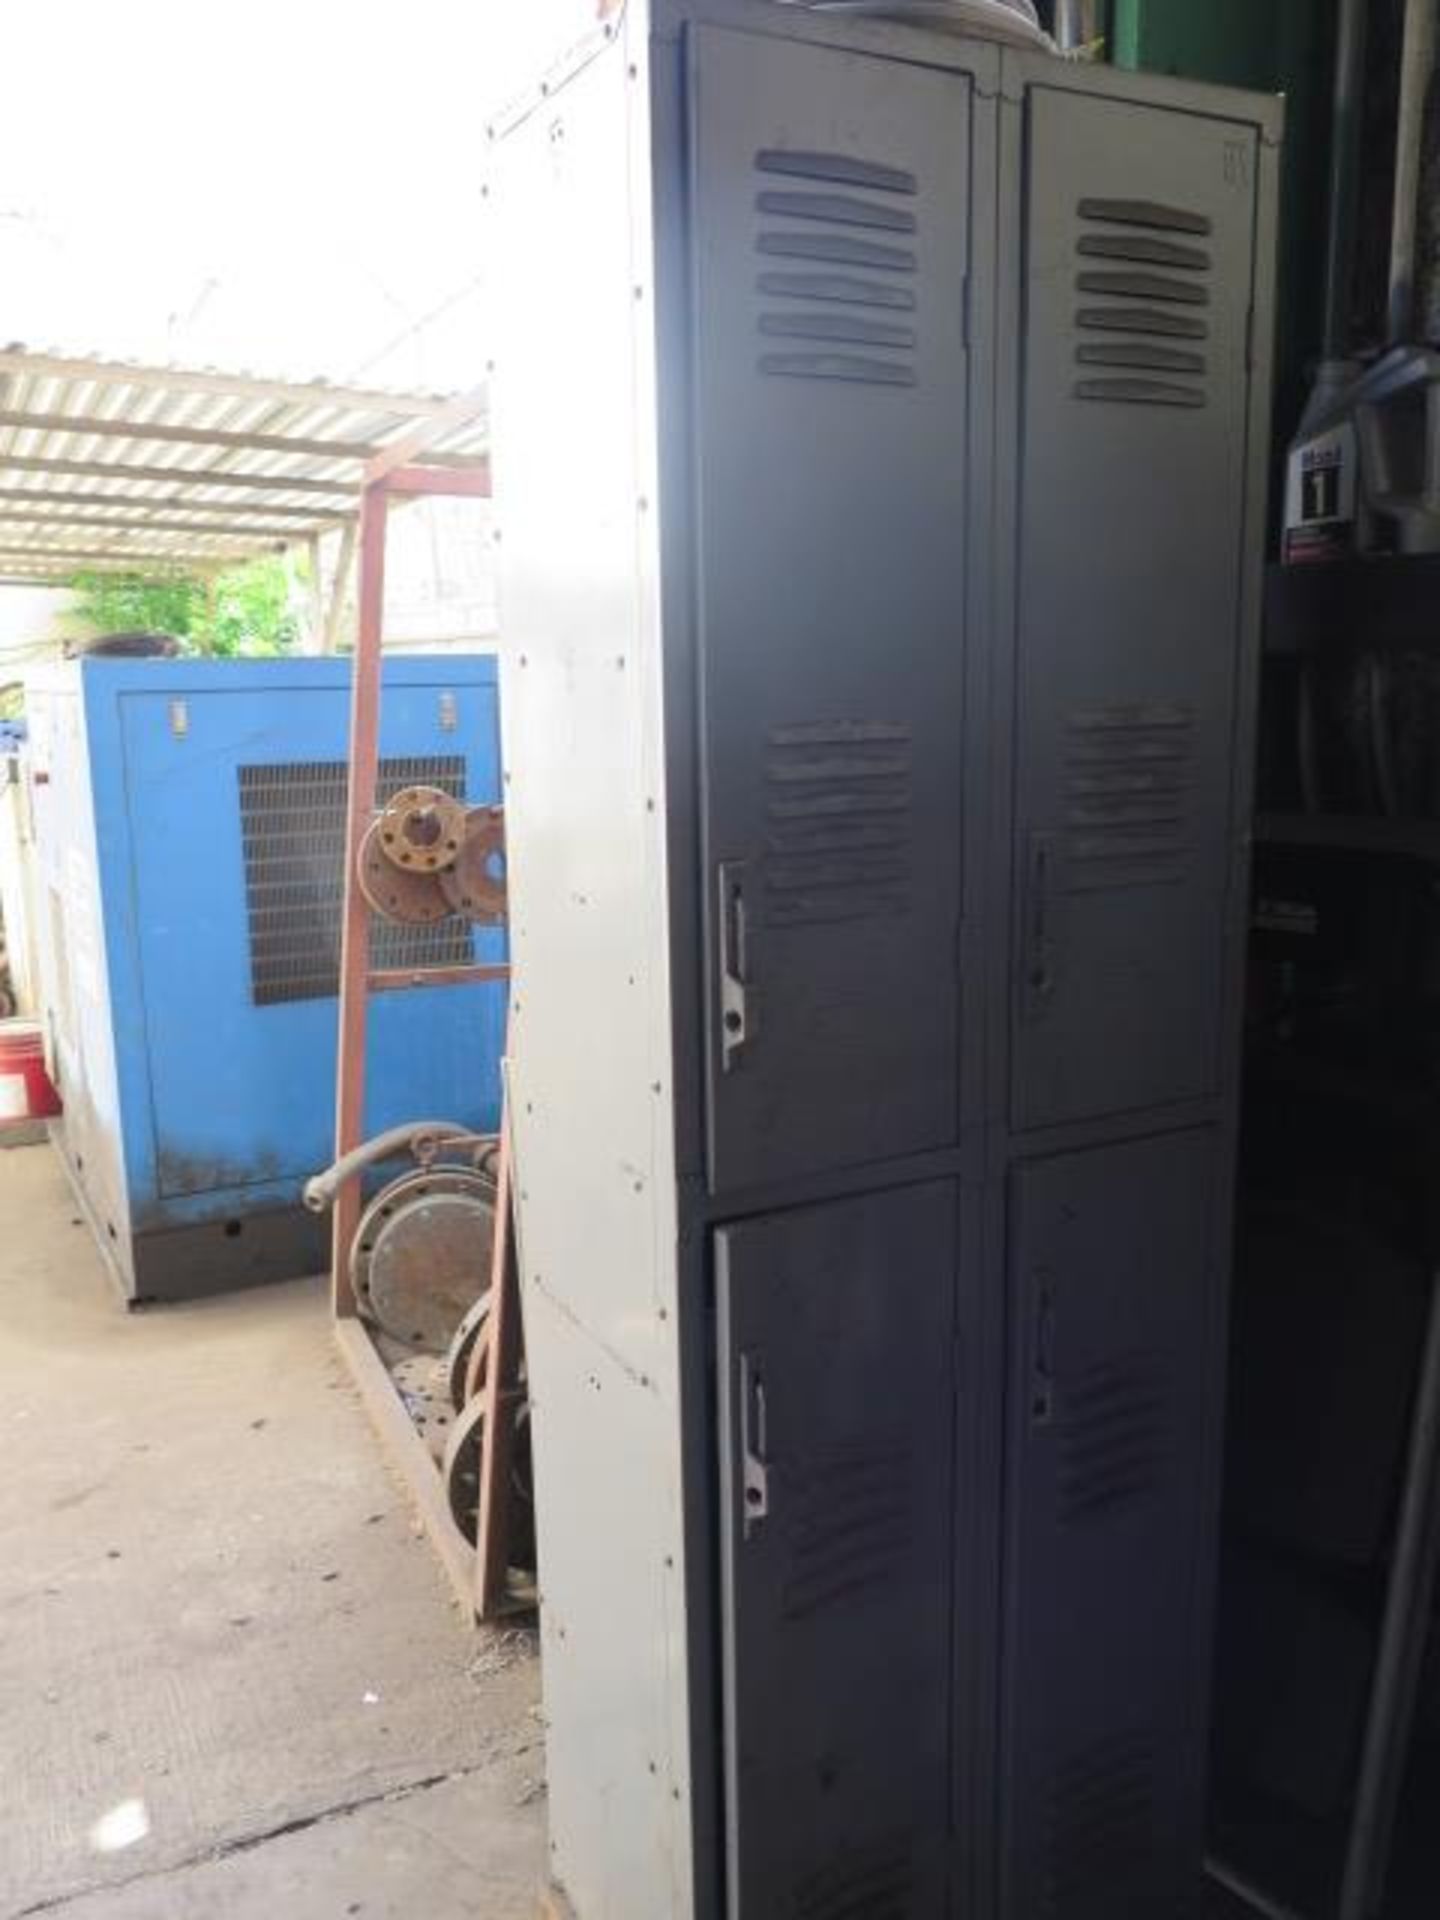 Shop Carts (3), Employee Lockers and Wooden Cabinet (SOLD AS-IS - NO WARRANTY) - Image 4 of 5